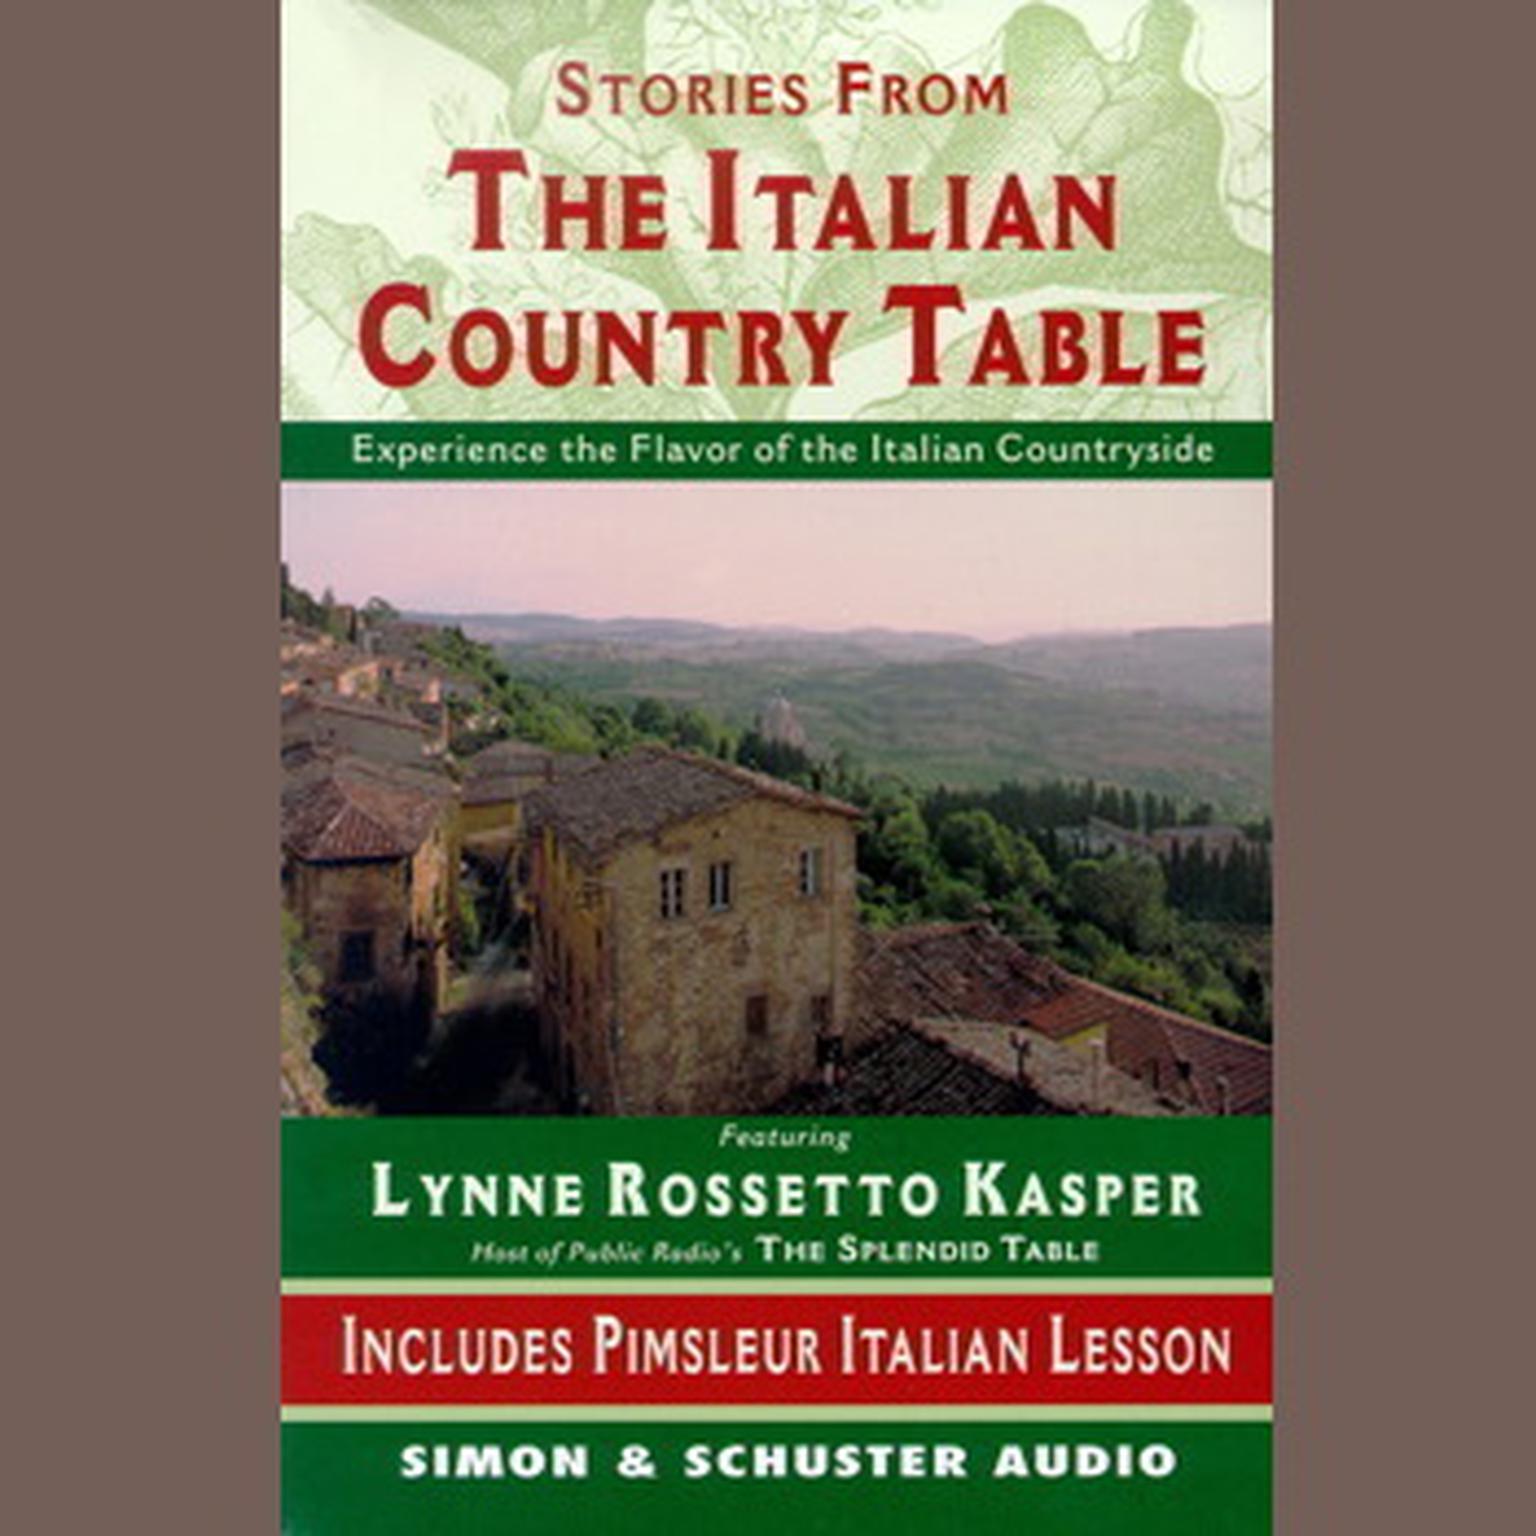 The Stories from The Italian Country Table (Abridged): Exploring the Culture of Italian Farmhouse Cooking Audiobook, by Lynne Rossetto Kasper